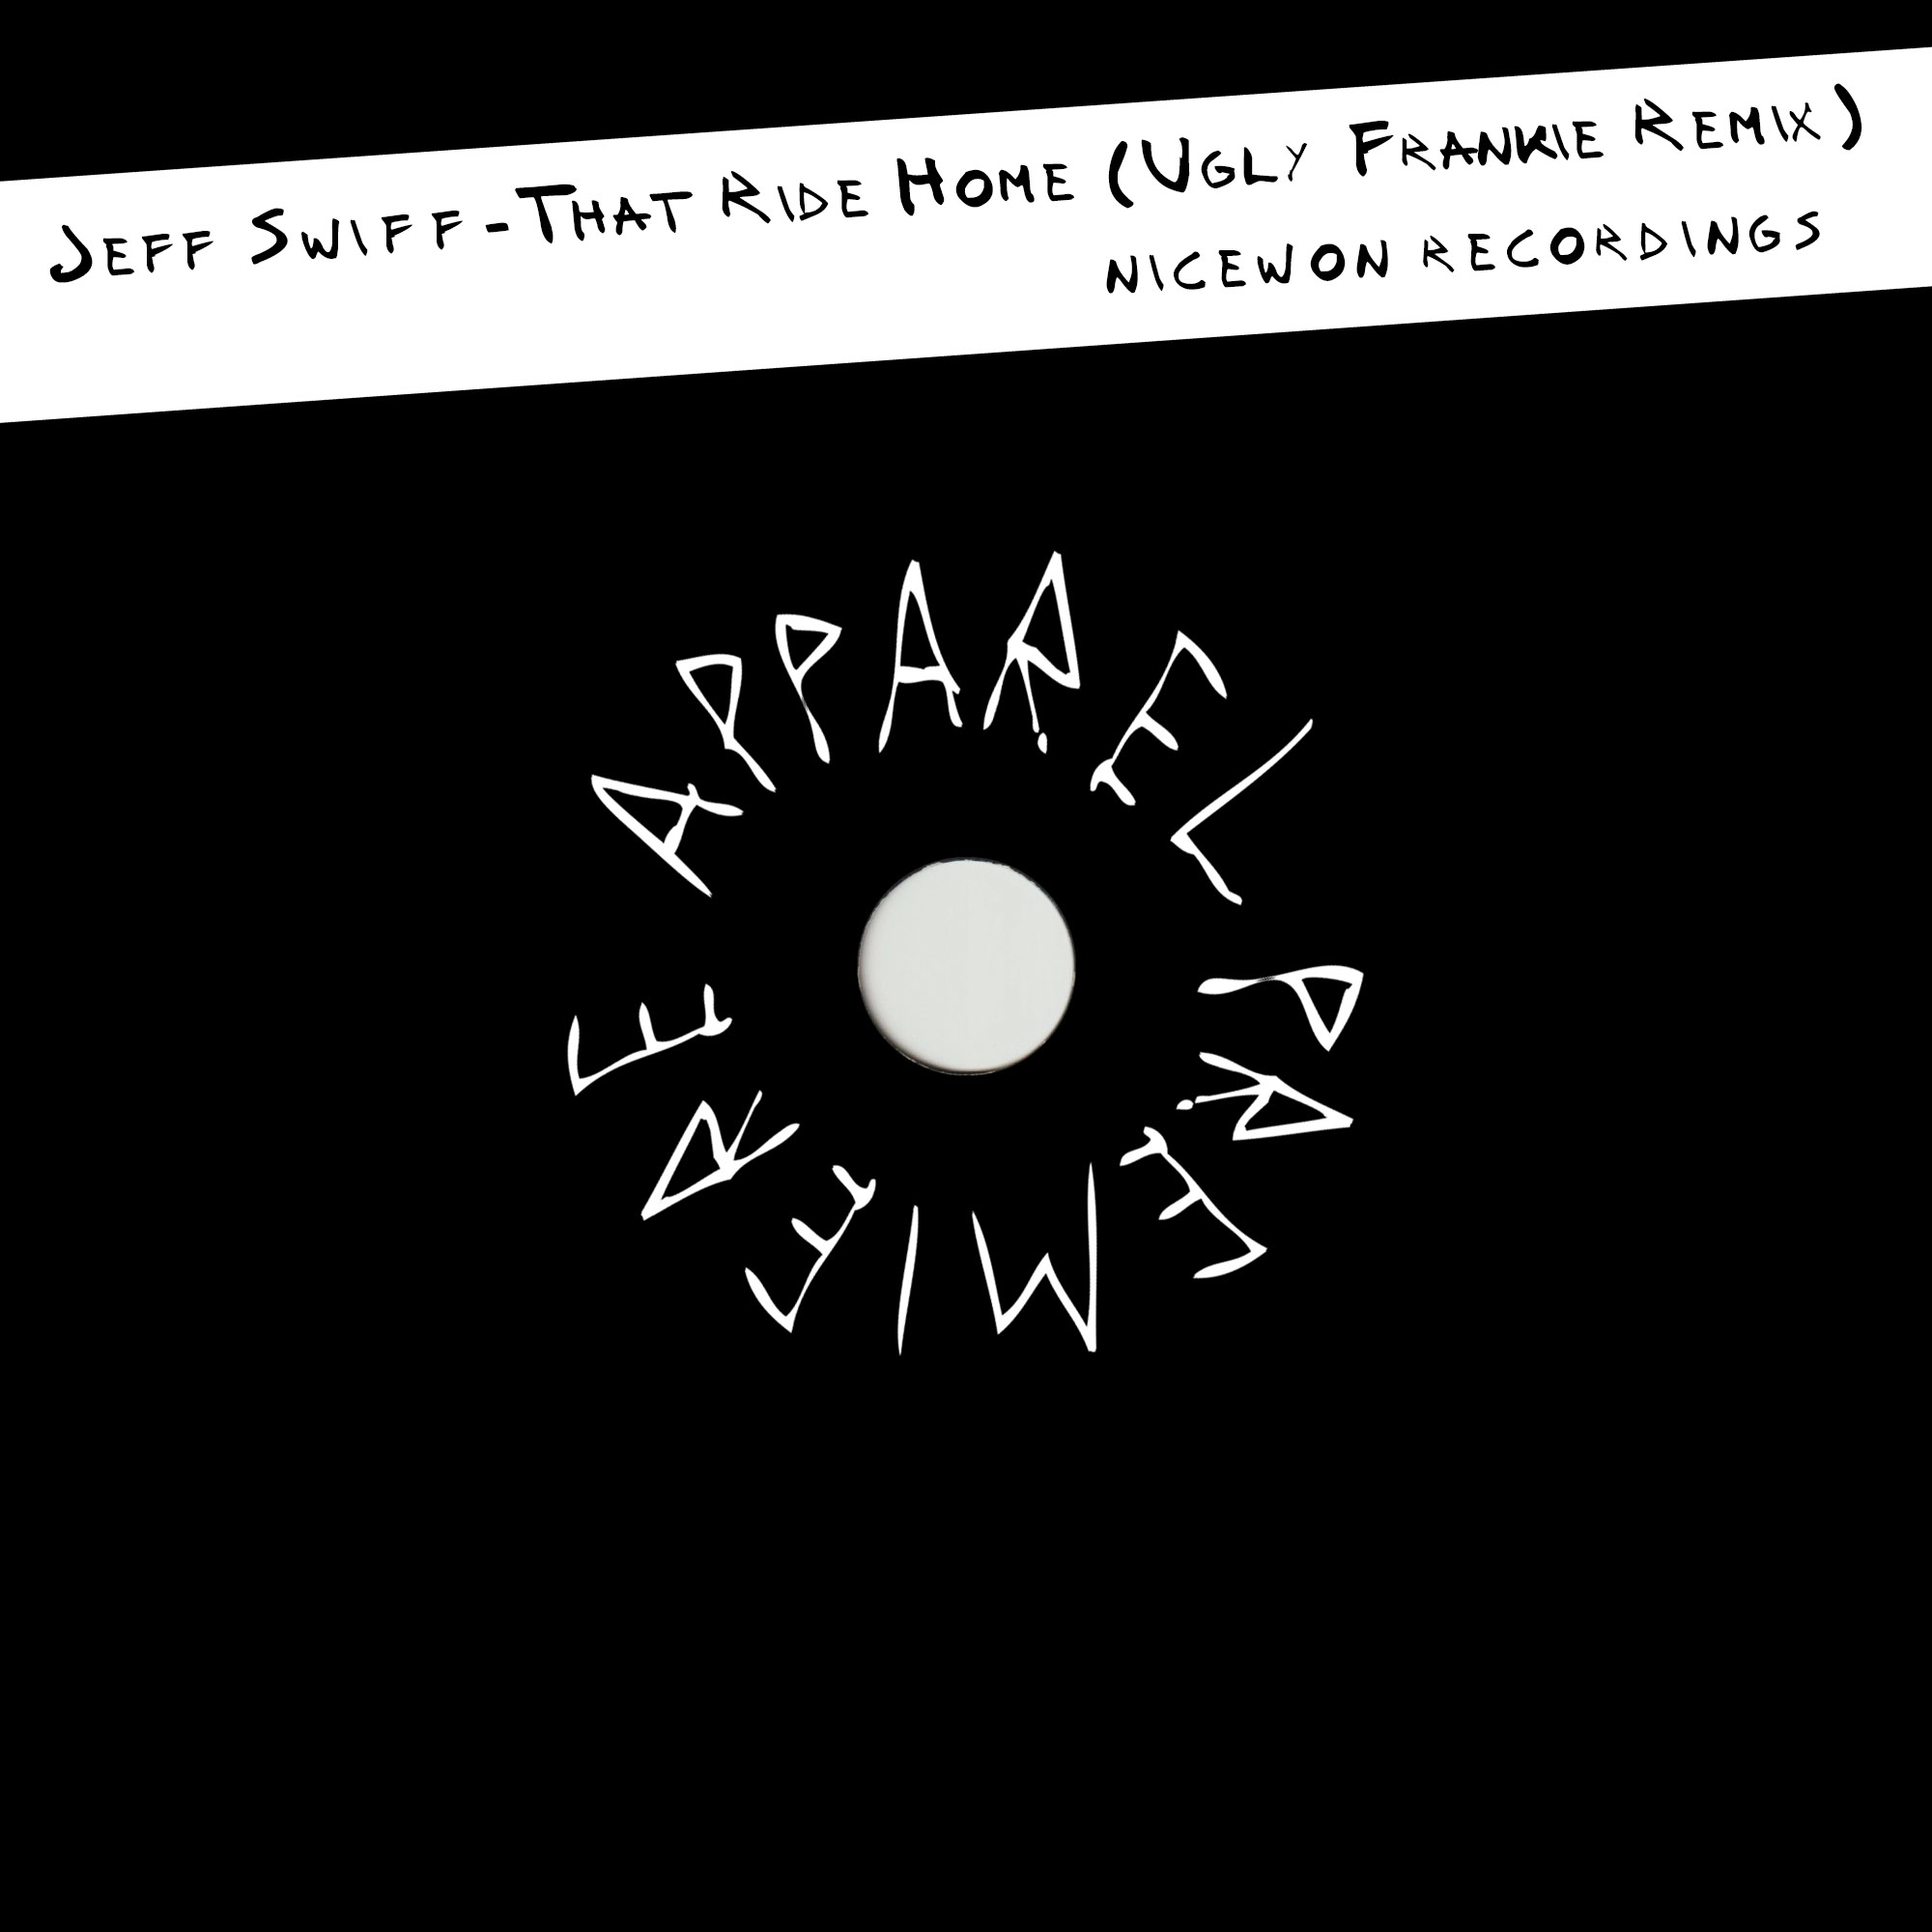 APPAREL PREMIERE Jeff Swiff That Ride Home (Ugly Frankie Remix) [Nicewon Recordings]